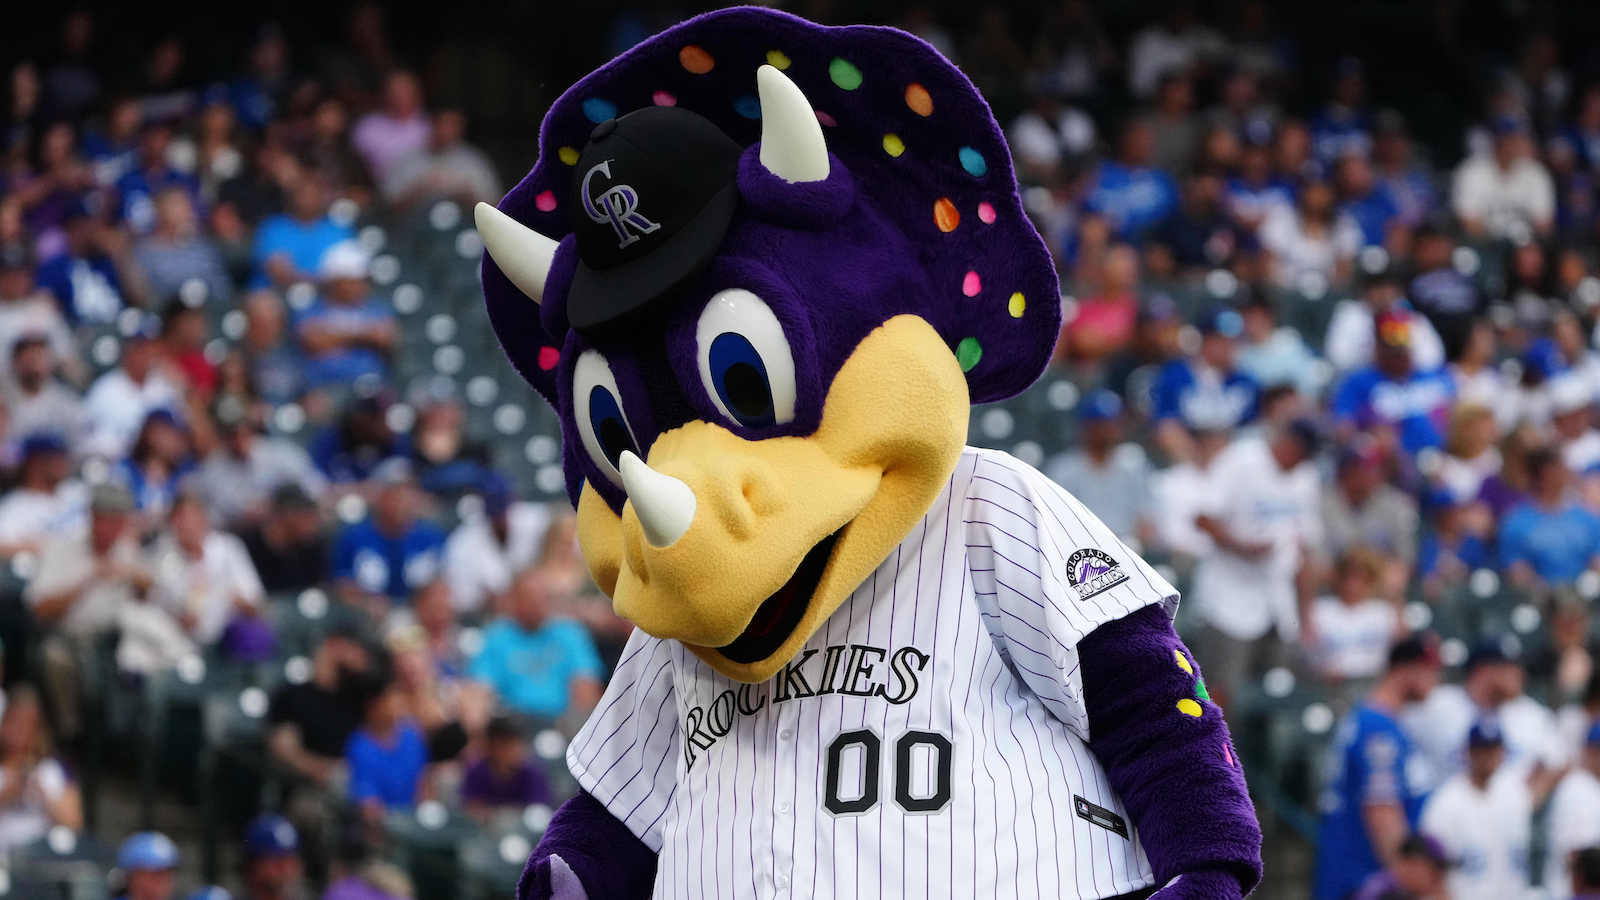 Fan TACKLES Colorado Rockies' mascot Dinger & 'could face assault charges'  as police investigate